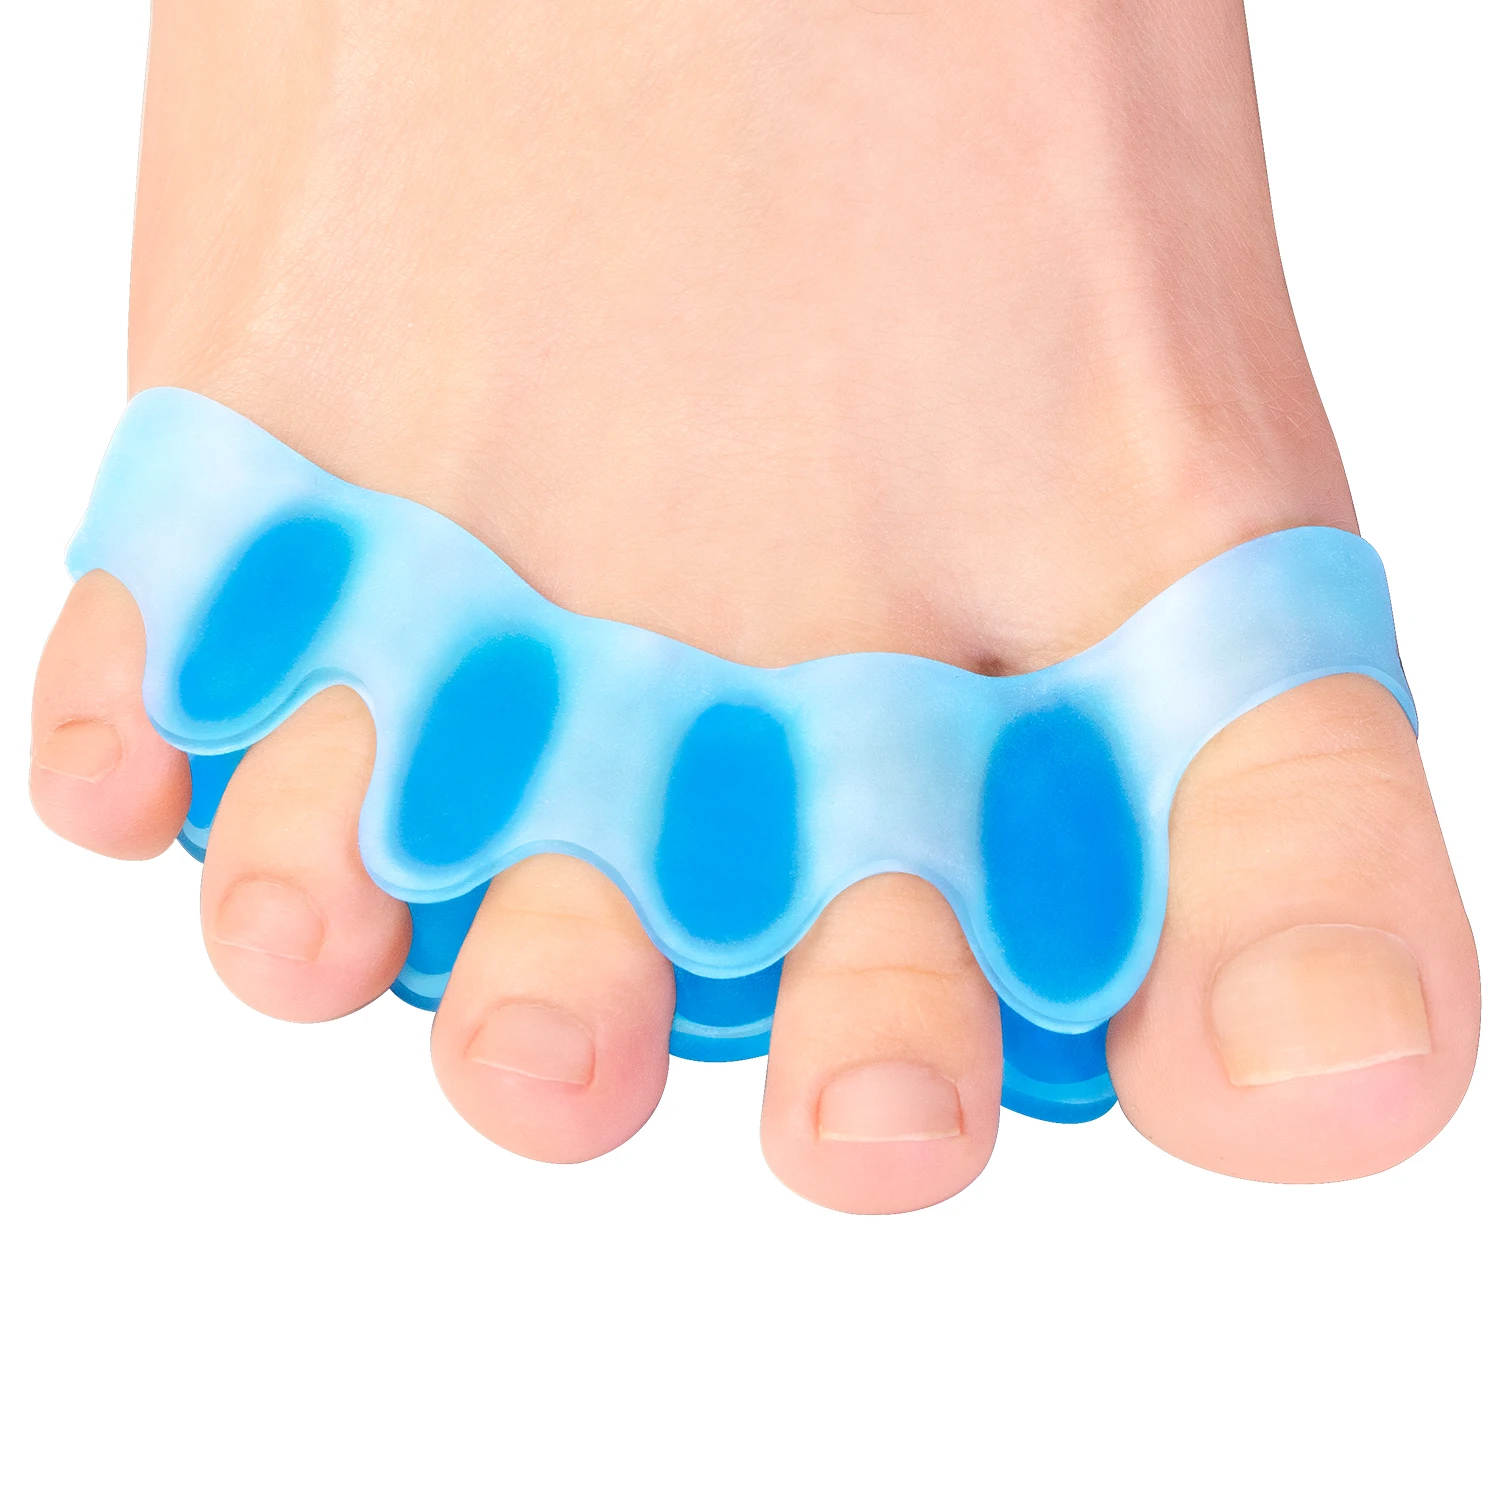 2pcs Soft Transparent Blue Toe Separators Hallux Valgus Bunion Corrector Separate Overlapping Toes Pain Relief Foot Care C1757 vicks 1 2 gallon cool relief free humidifier vul600 blue humidifier diffuser air humidifier